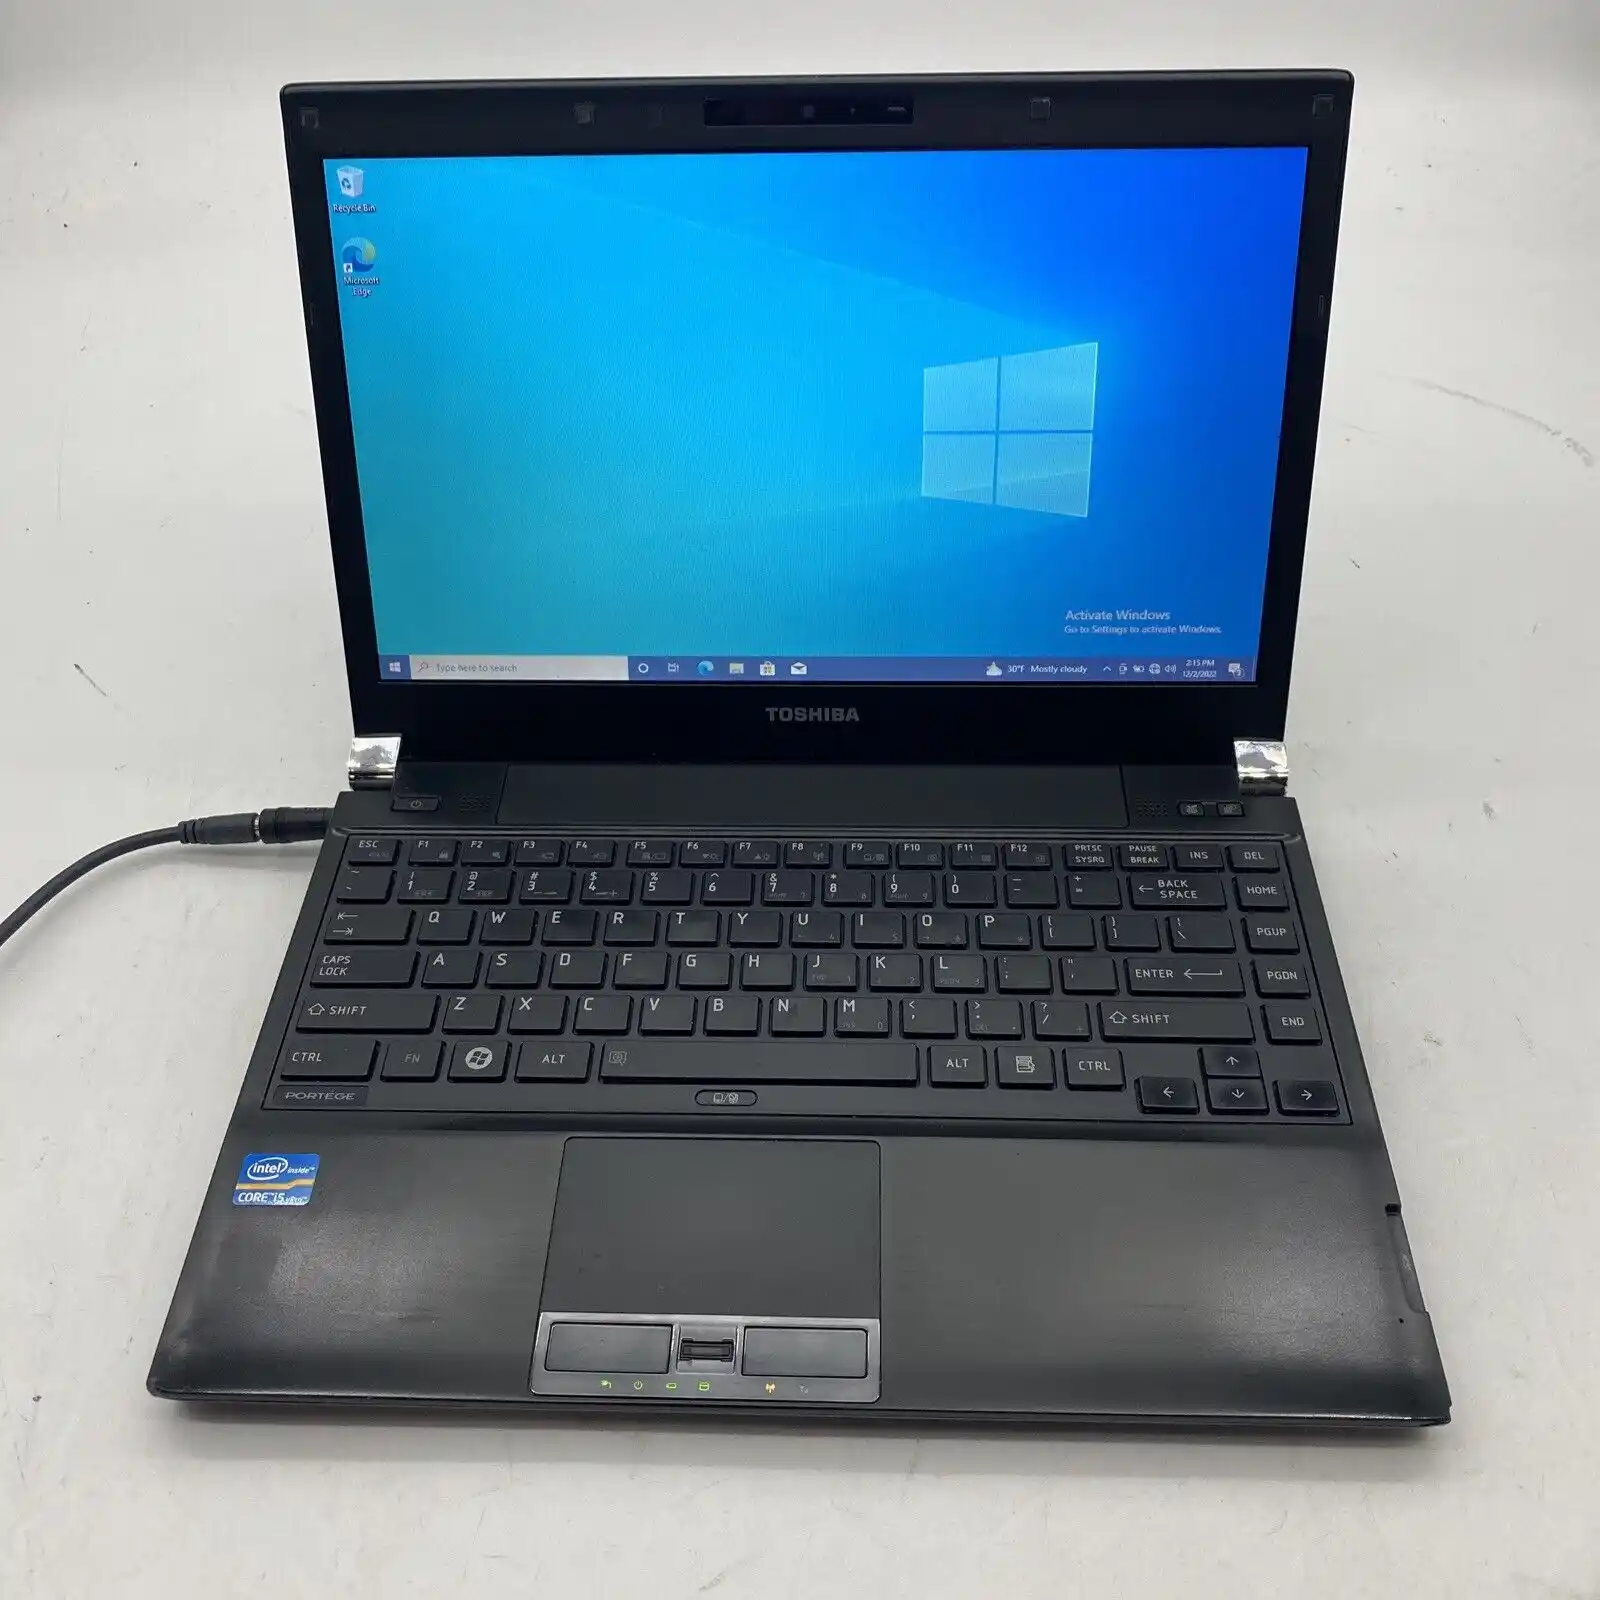 Toshiba Portege R930 Core I5 3Gen Ram 8Gb Hdd 500Gb Speed 2.60Ghz Display 12'' Battery 2Hrs Charge 